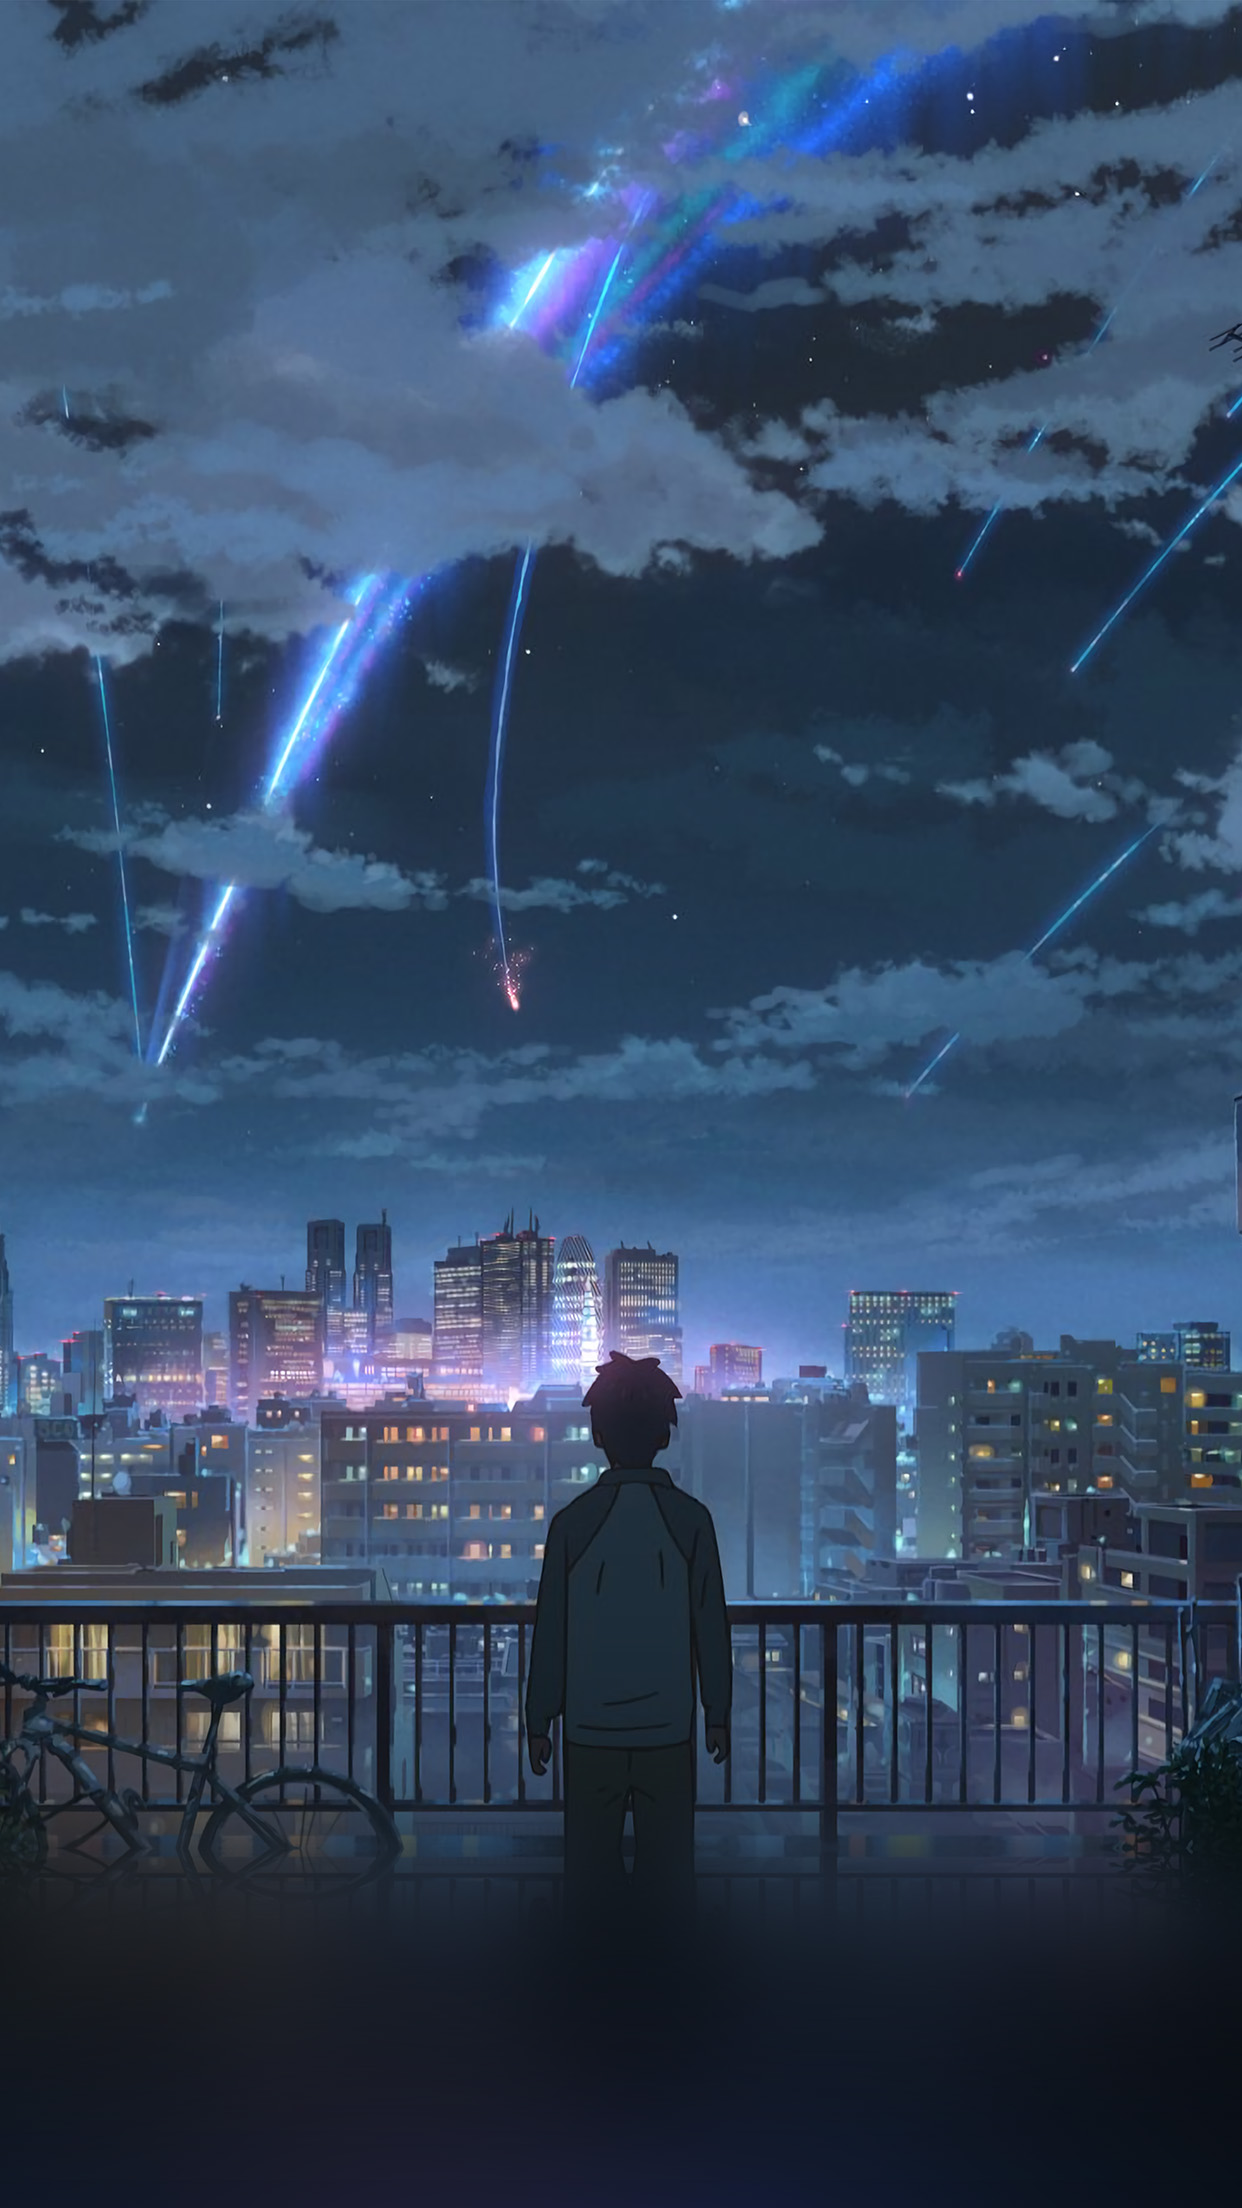 Yourname Night Anime Sky Illustration Art Android wallpaper